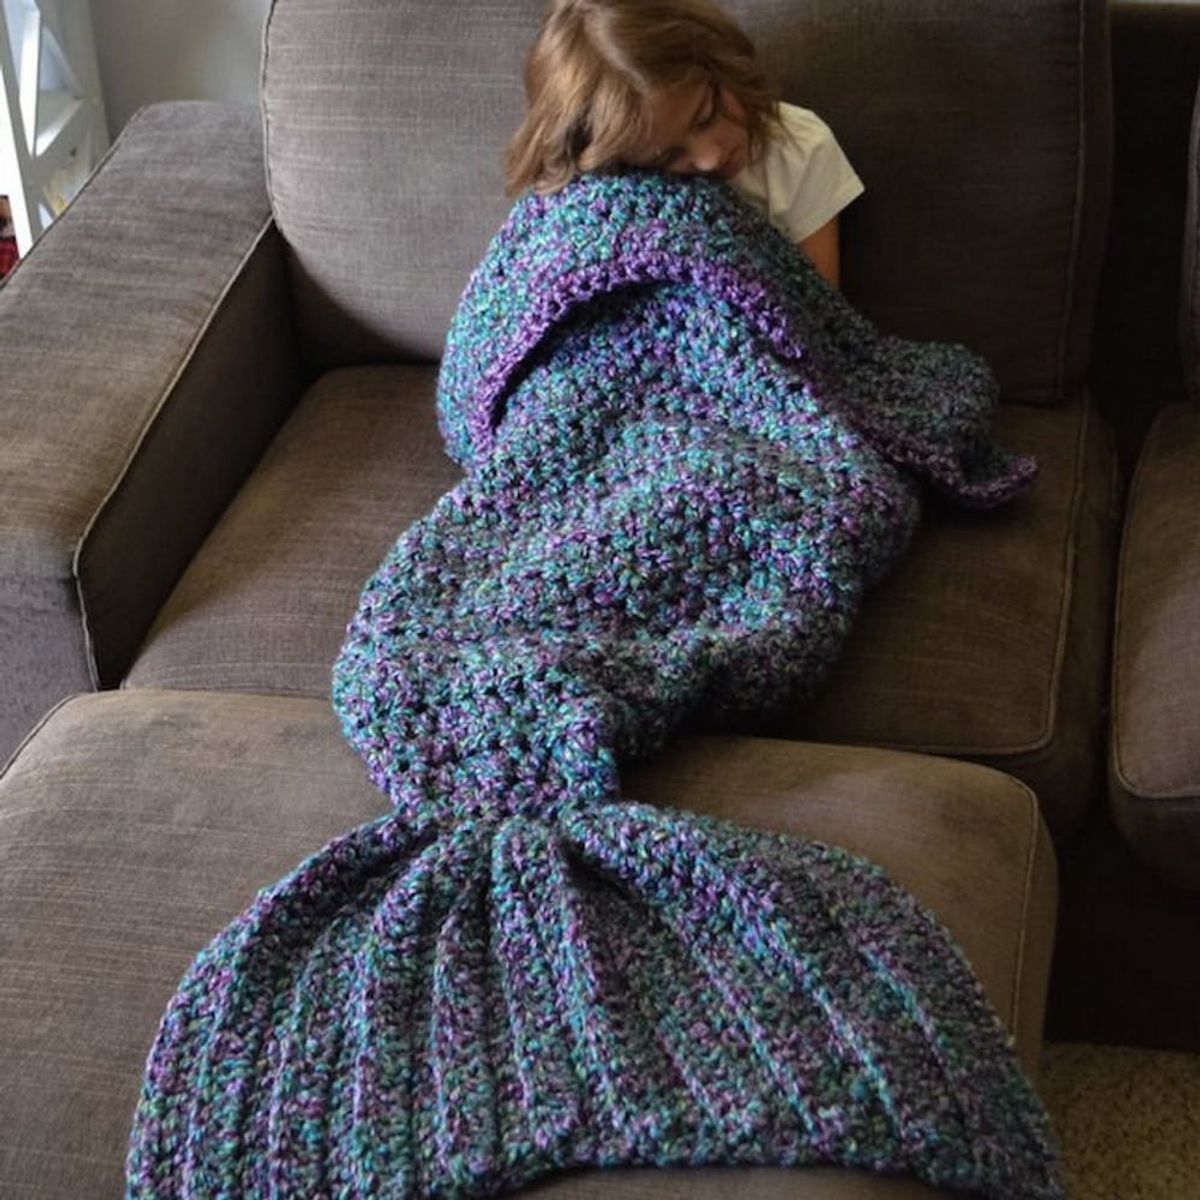 You NEED This Crocheted Mermaid Tail Blanket in Your Life